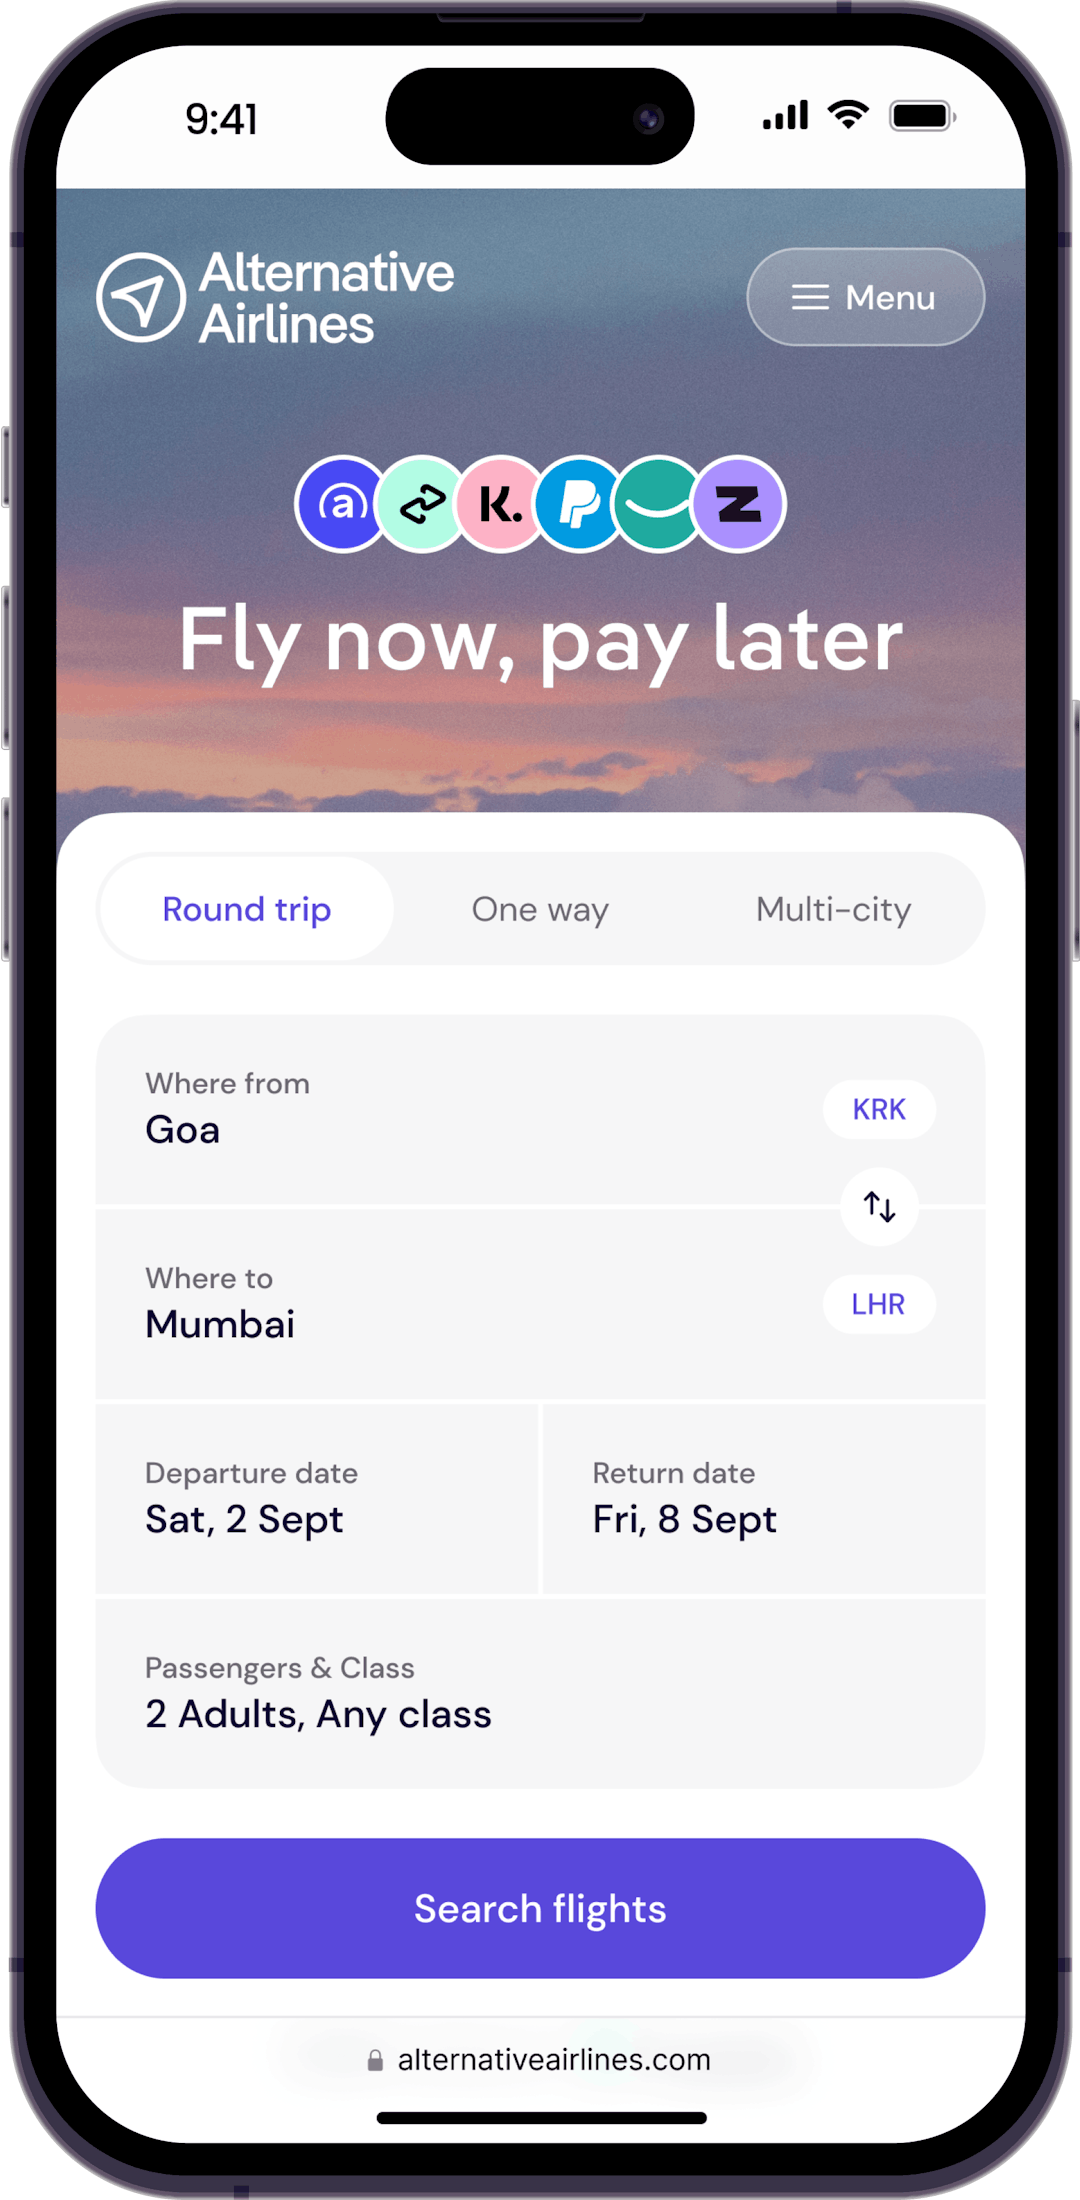 Step 1 - Search for flights in our search form